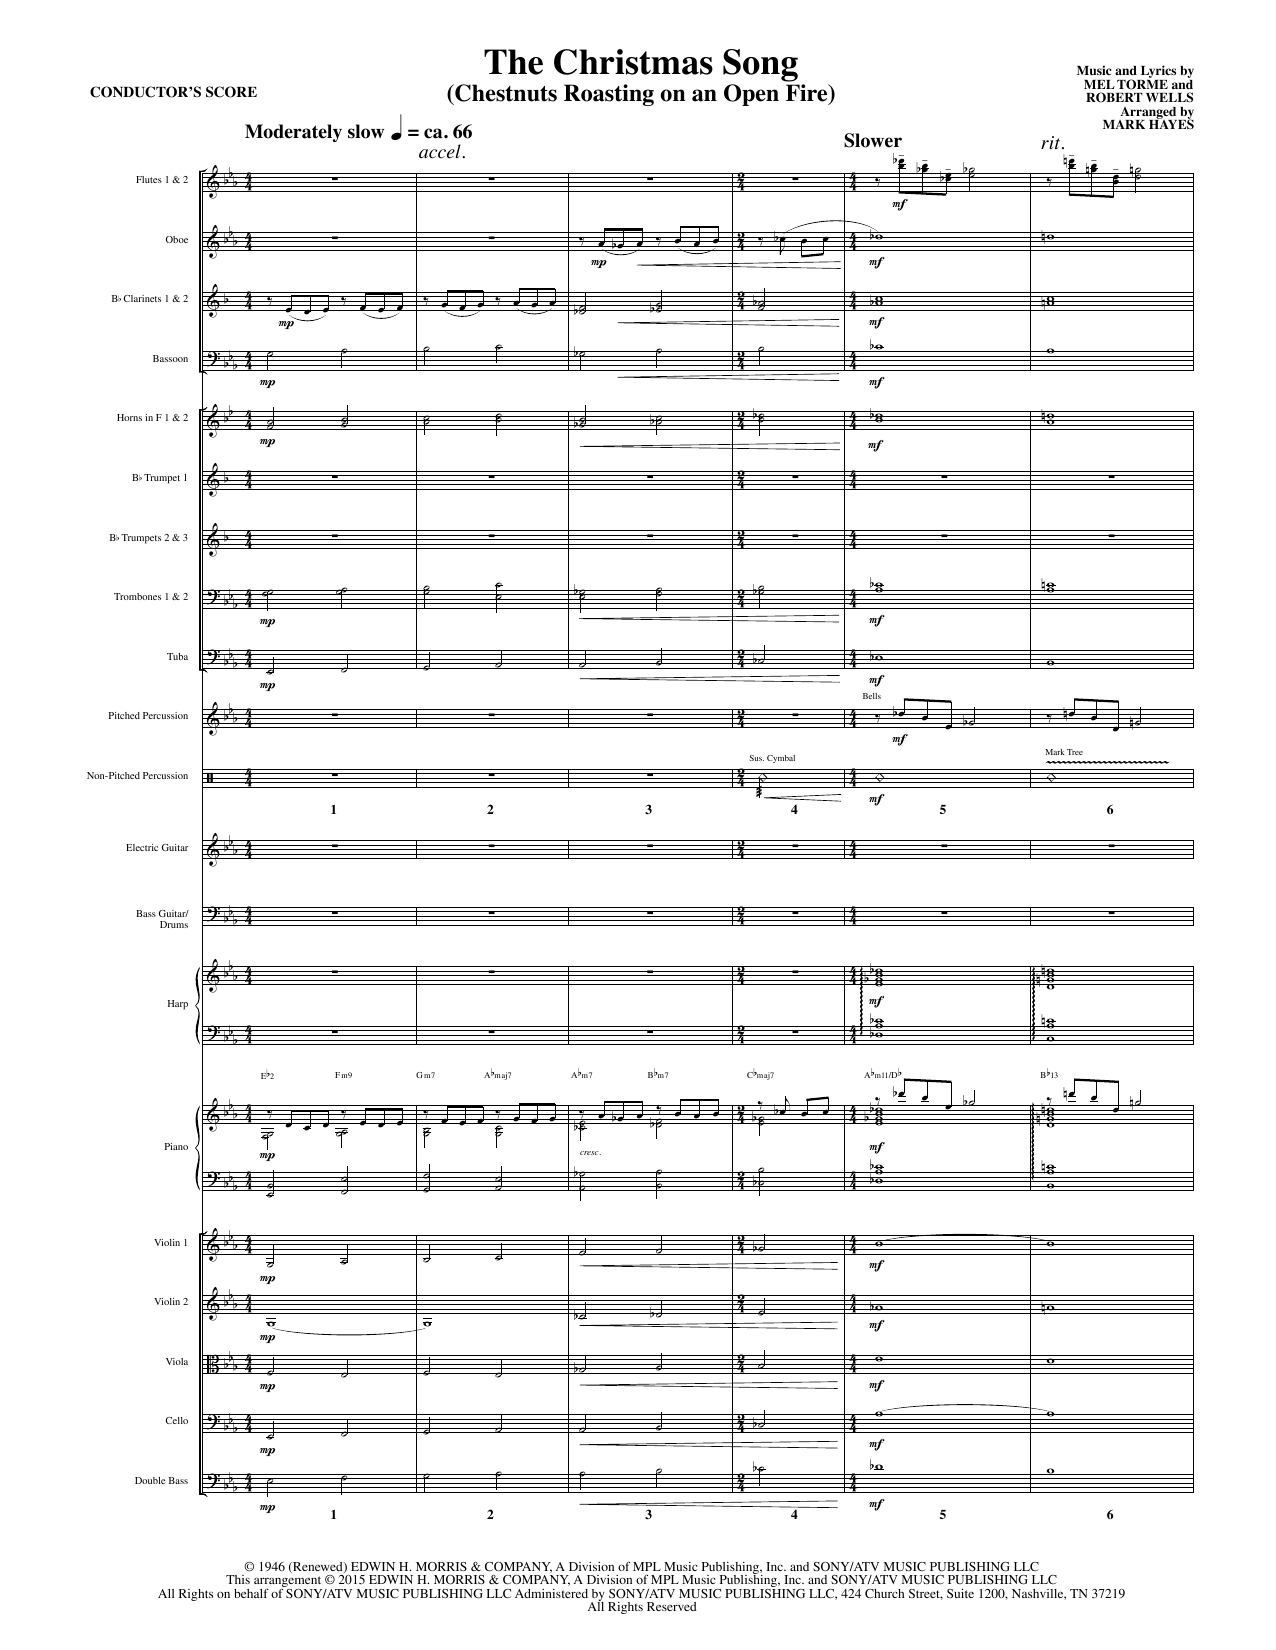 Mel Torme The Christmas Song (Chestnuts Roasting On An Open Fire) - Conductor Score (Full Score) sheet music notes and chords. Download Printable PDF.